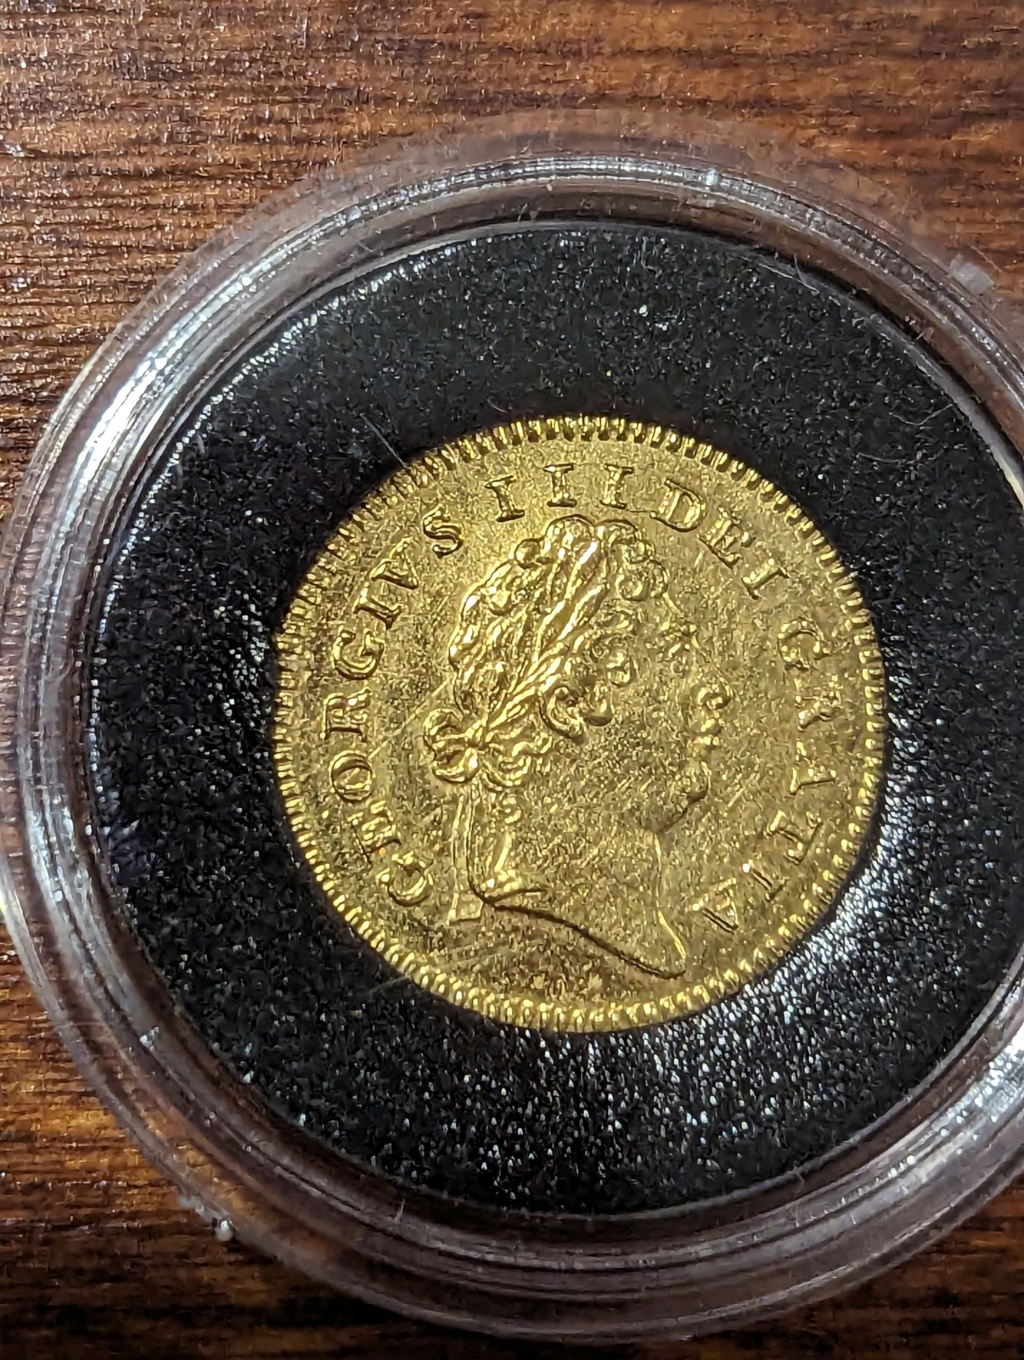 And a few more sovereigns Pxl_2135